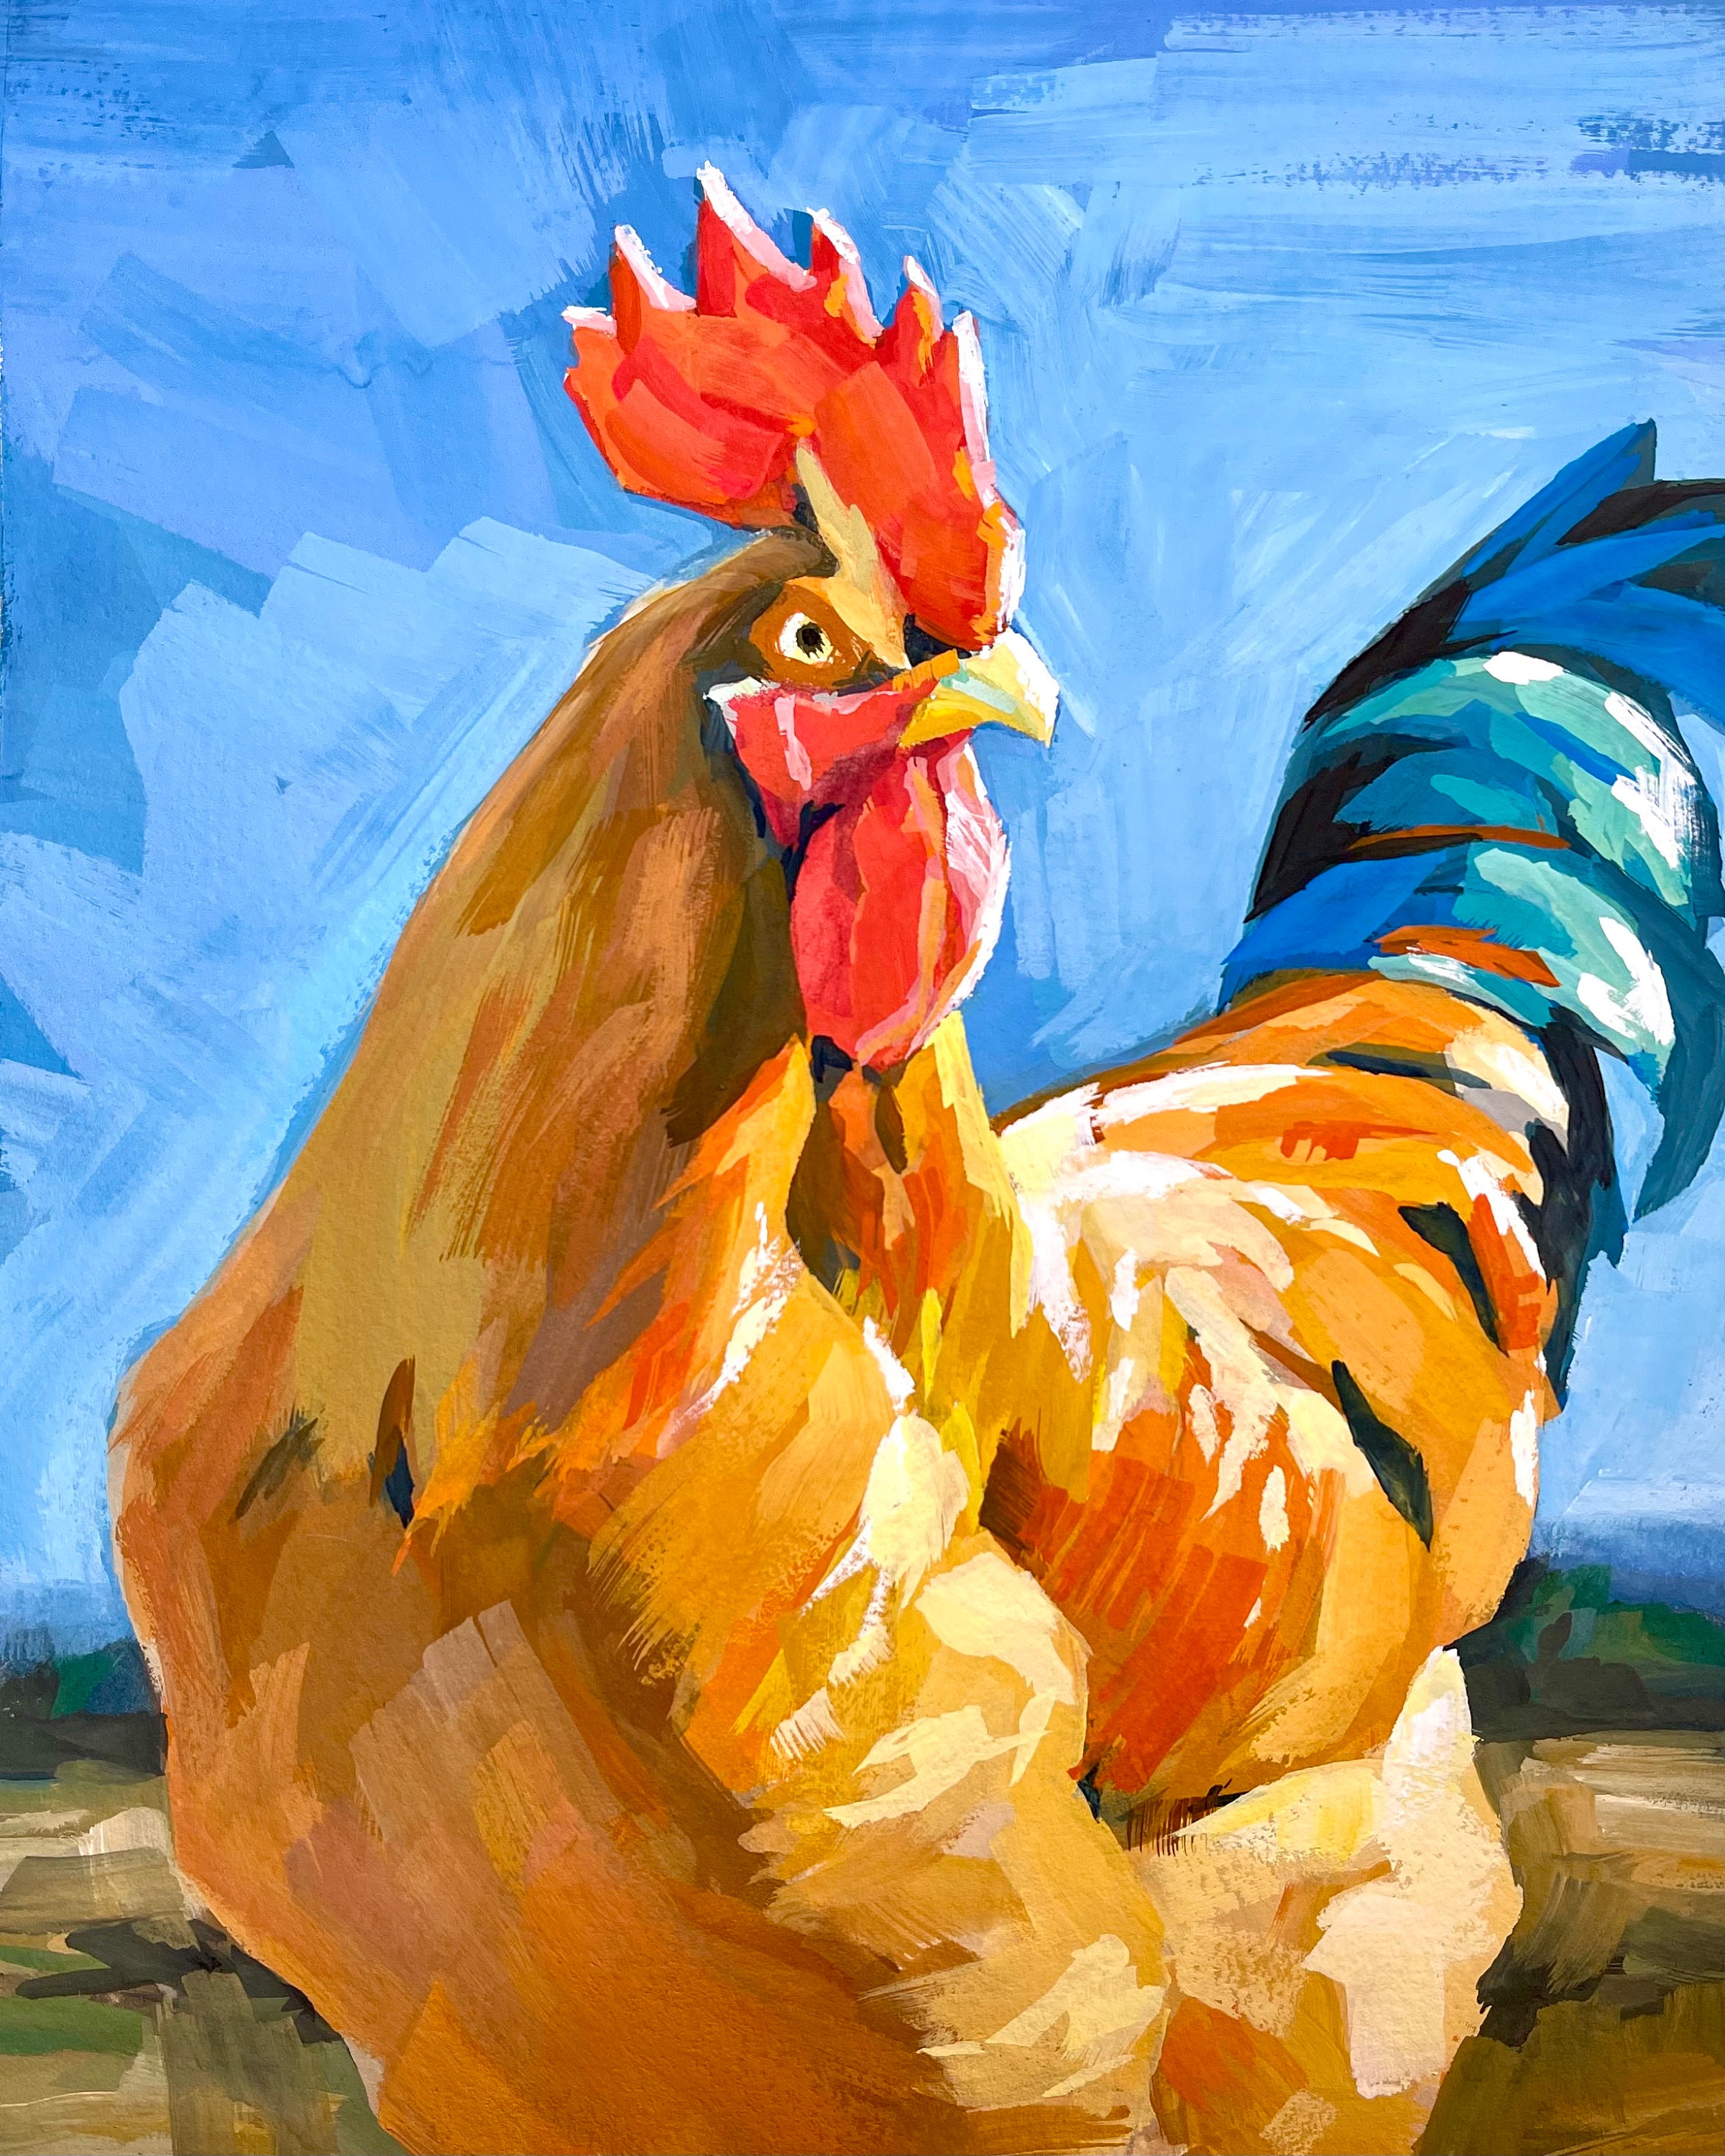 Rooster Art Print, Rooster Painting, Impressionist Rooster, Giclee